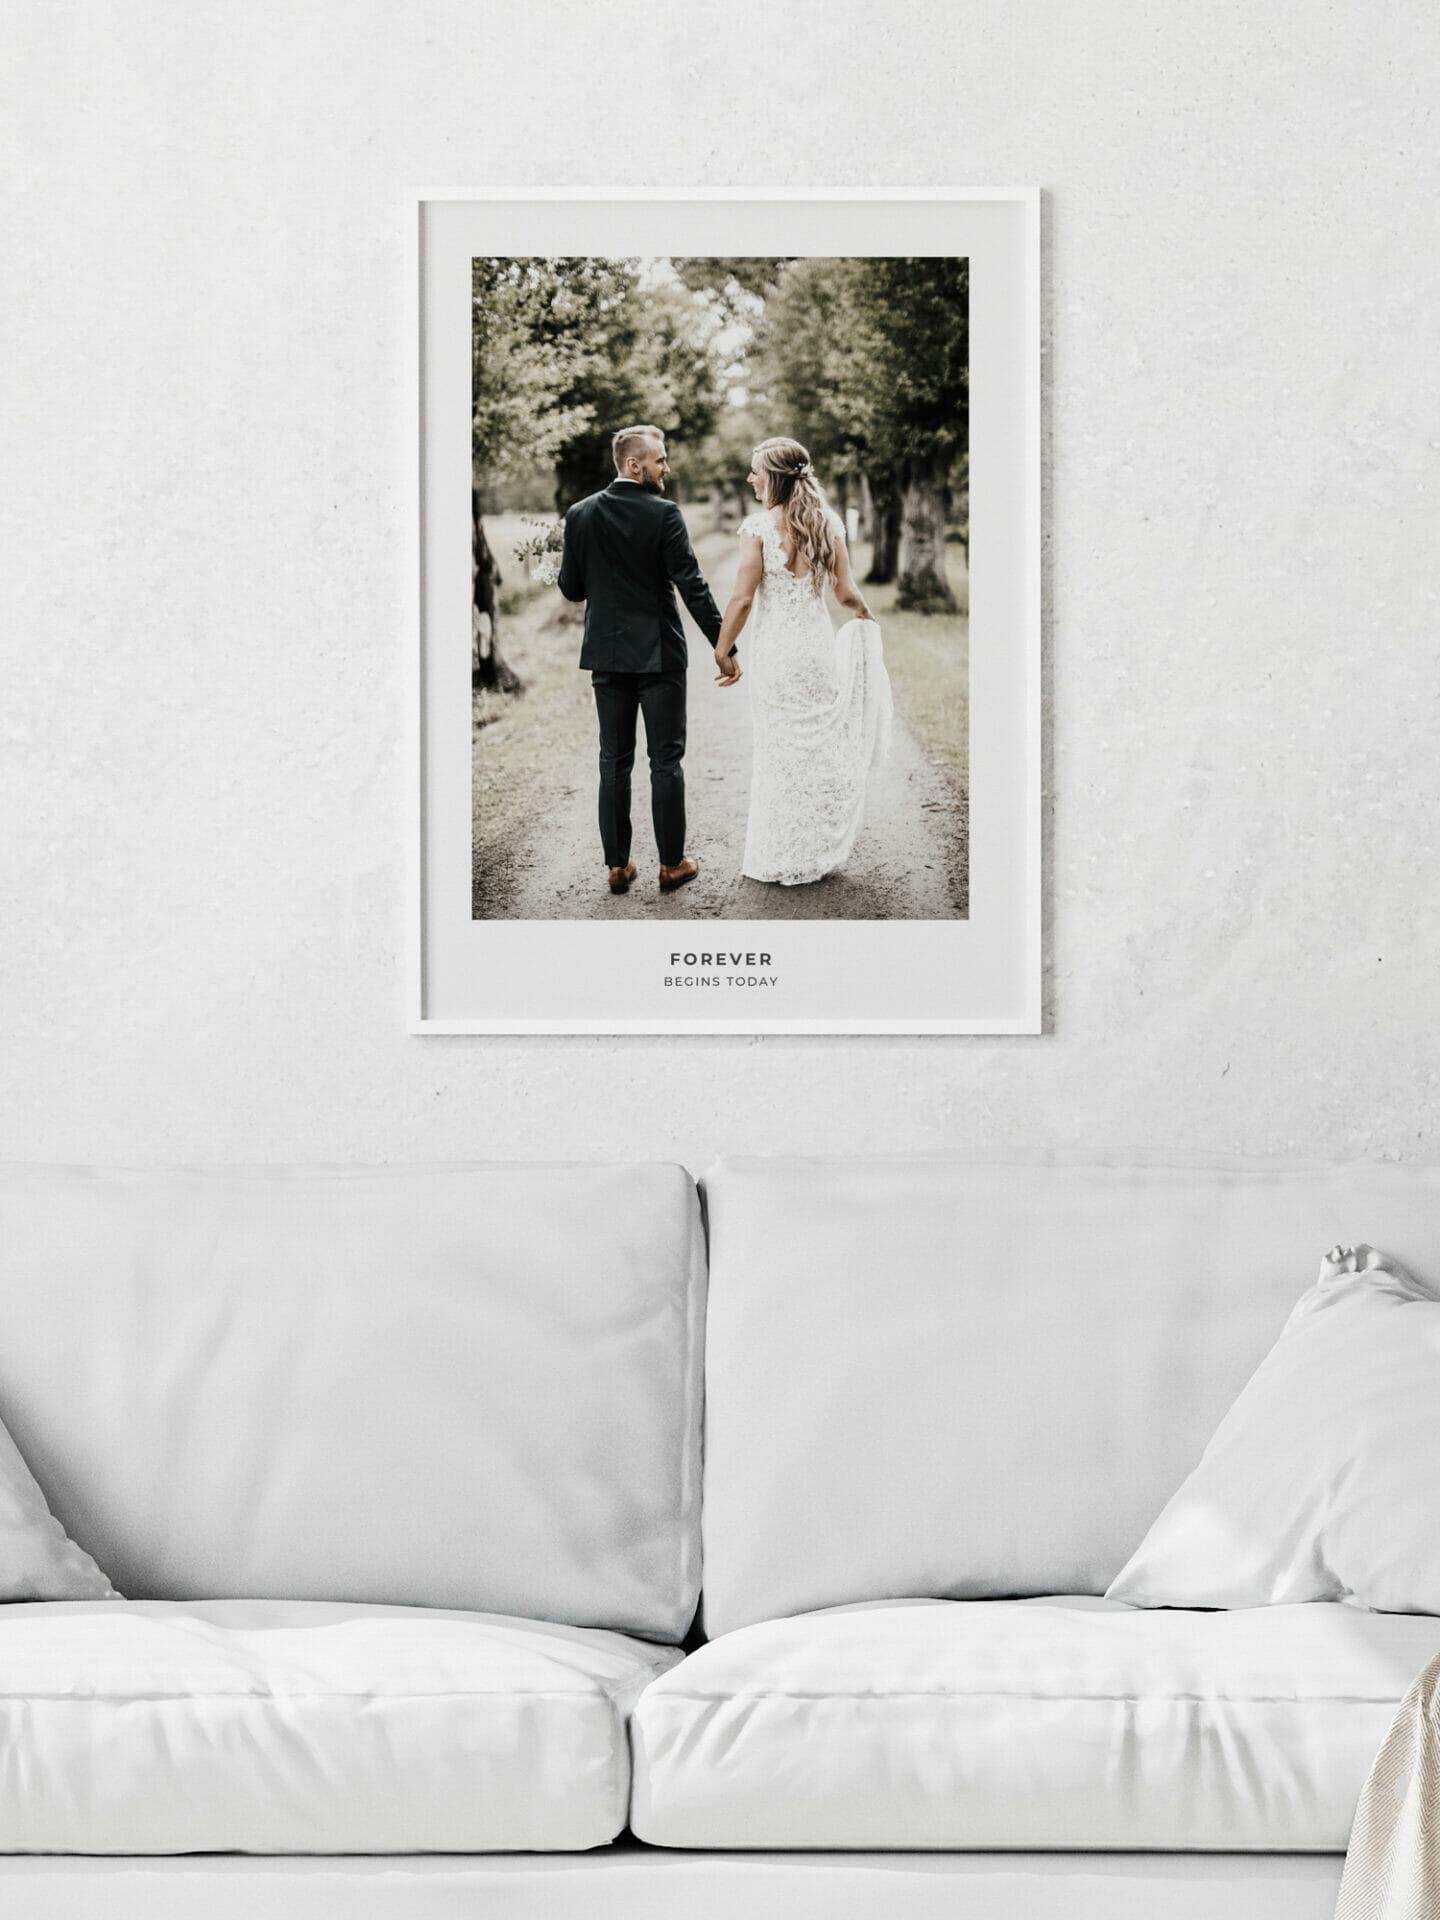 Poster of wedding couple in interior